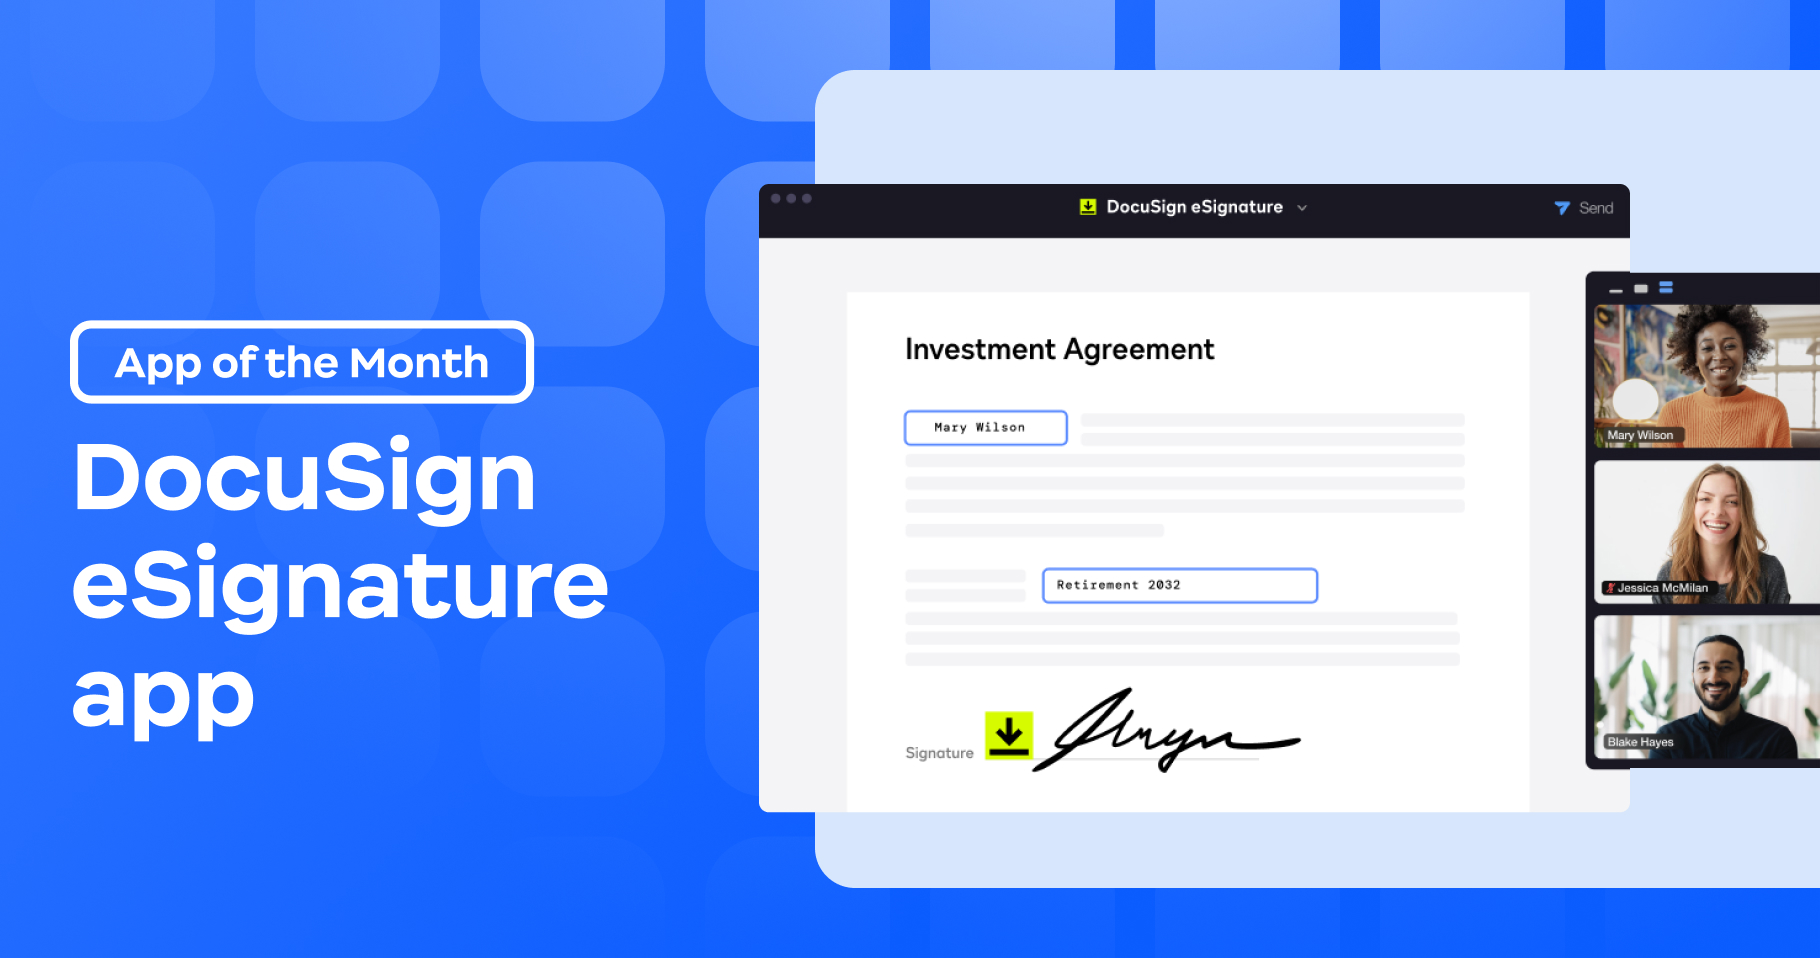 There’s a simple and secure way to manage digital signing and it’s transformed how people make agreements